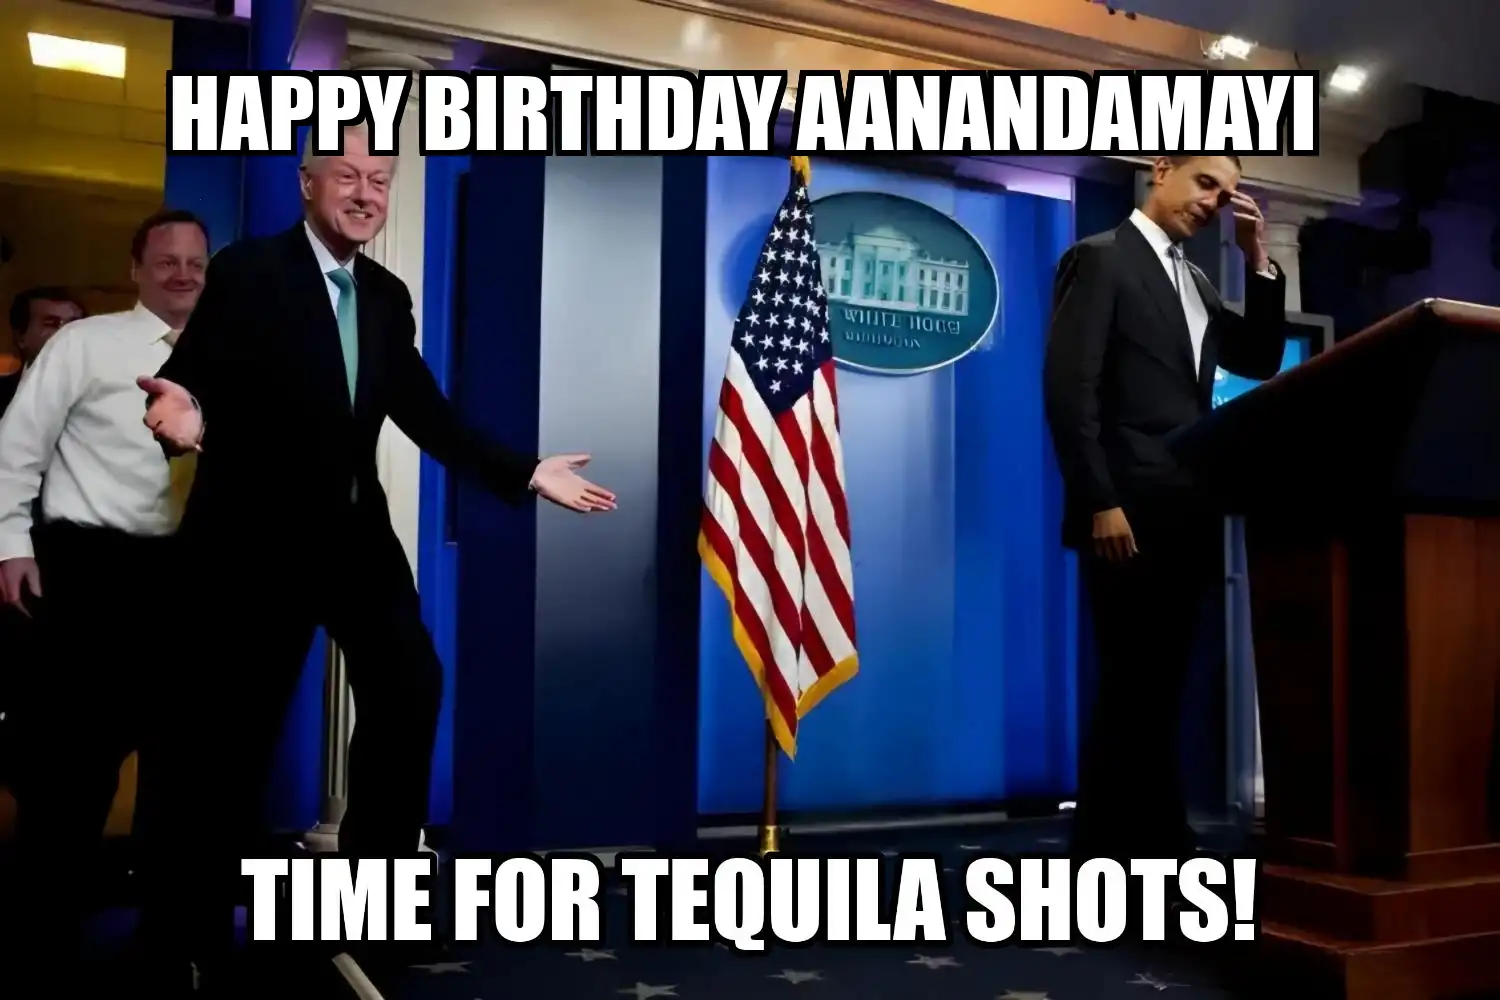 Happy Birthday Aanandamayi Time For Tequila Shots Memes